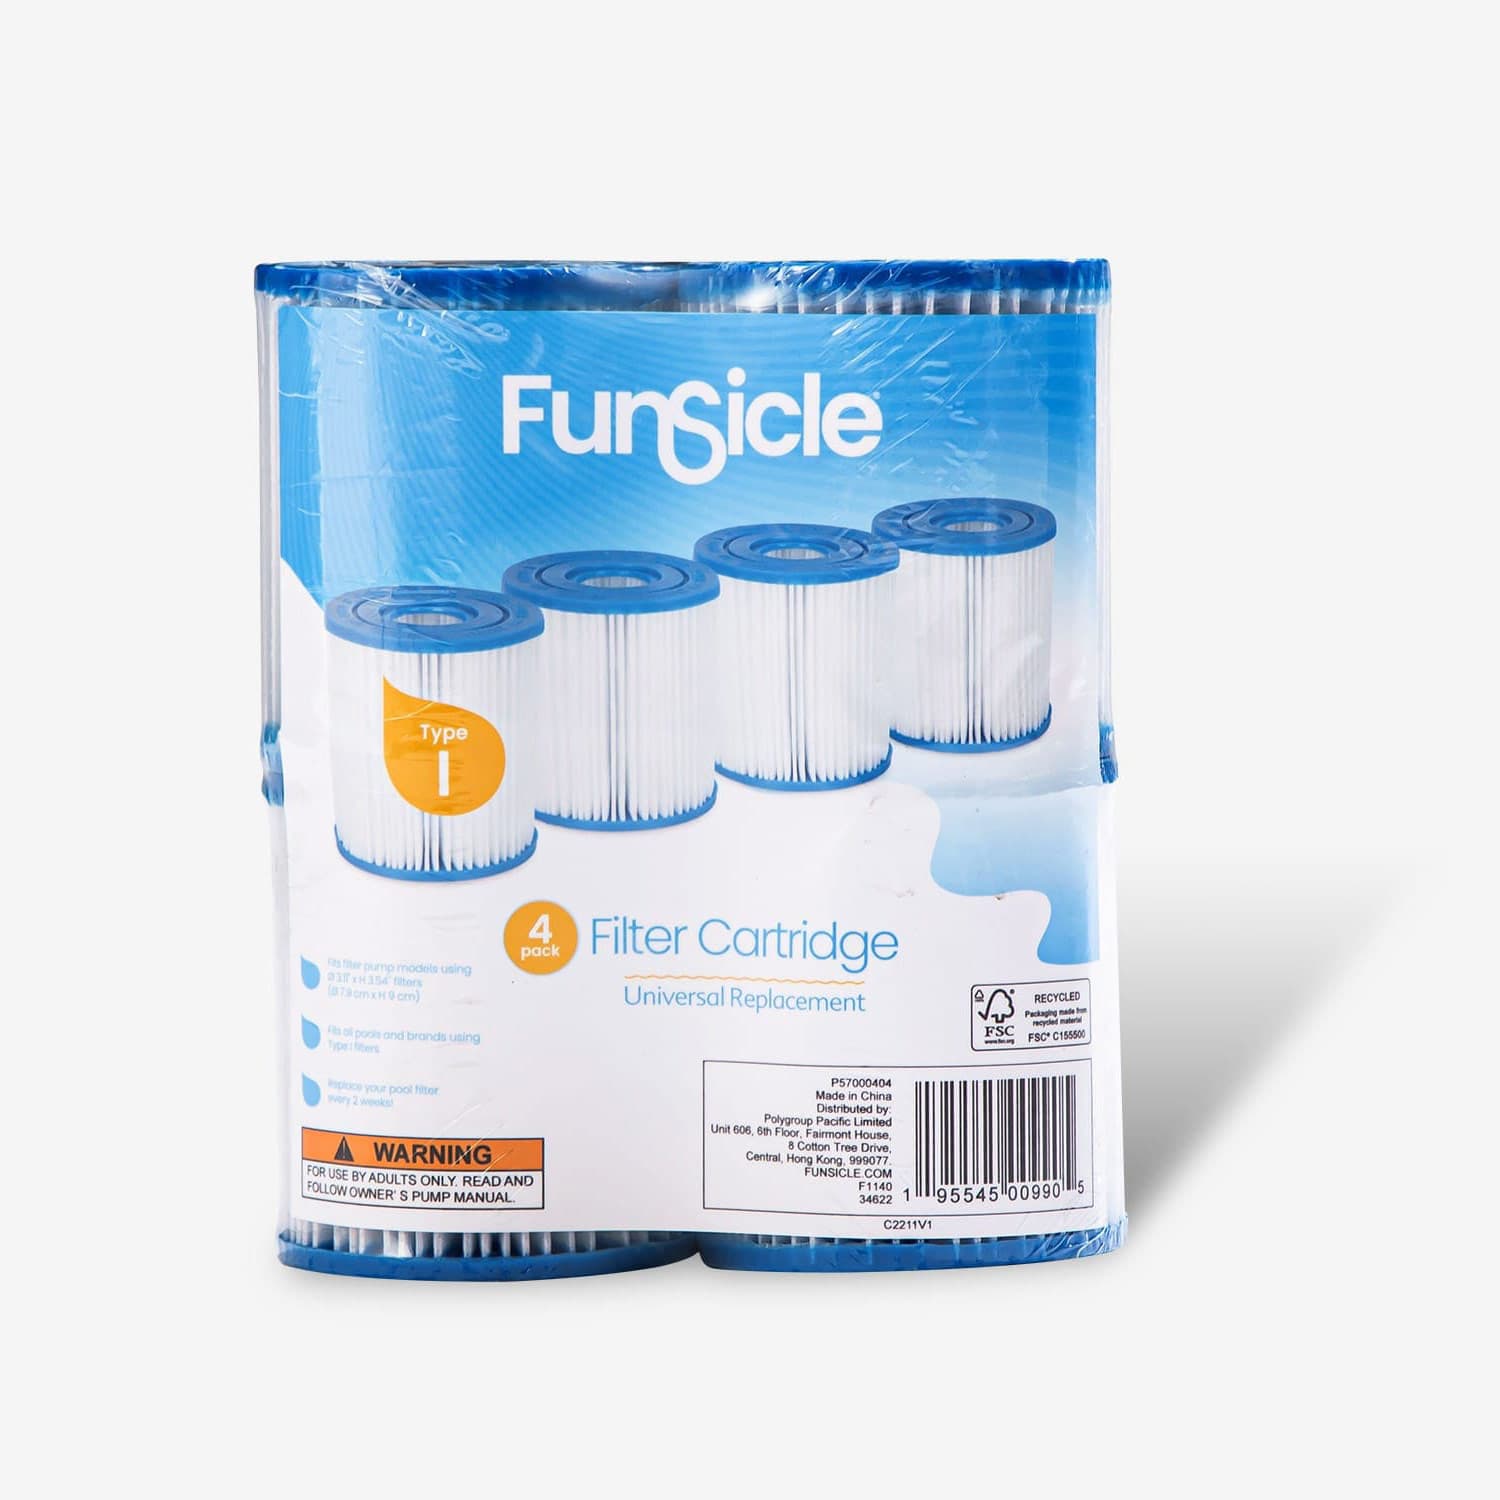 Funsicle Type I Filter Cartridge 4-pack packaging